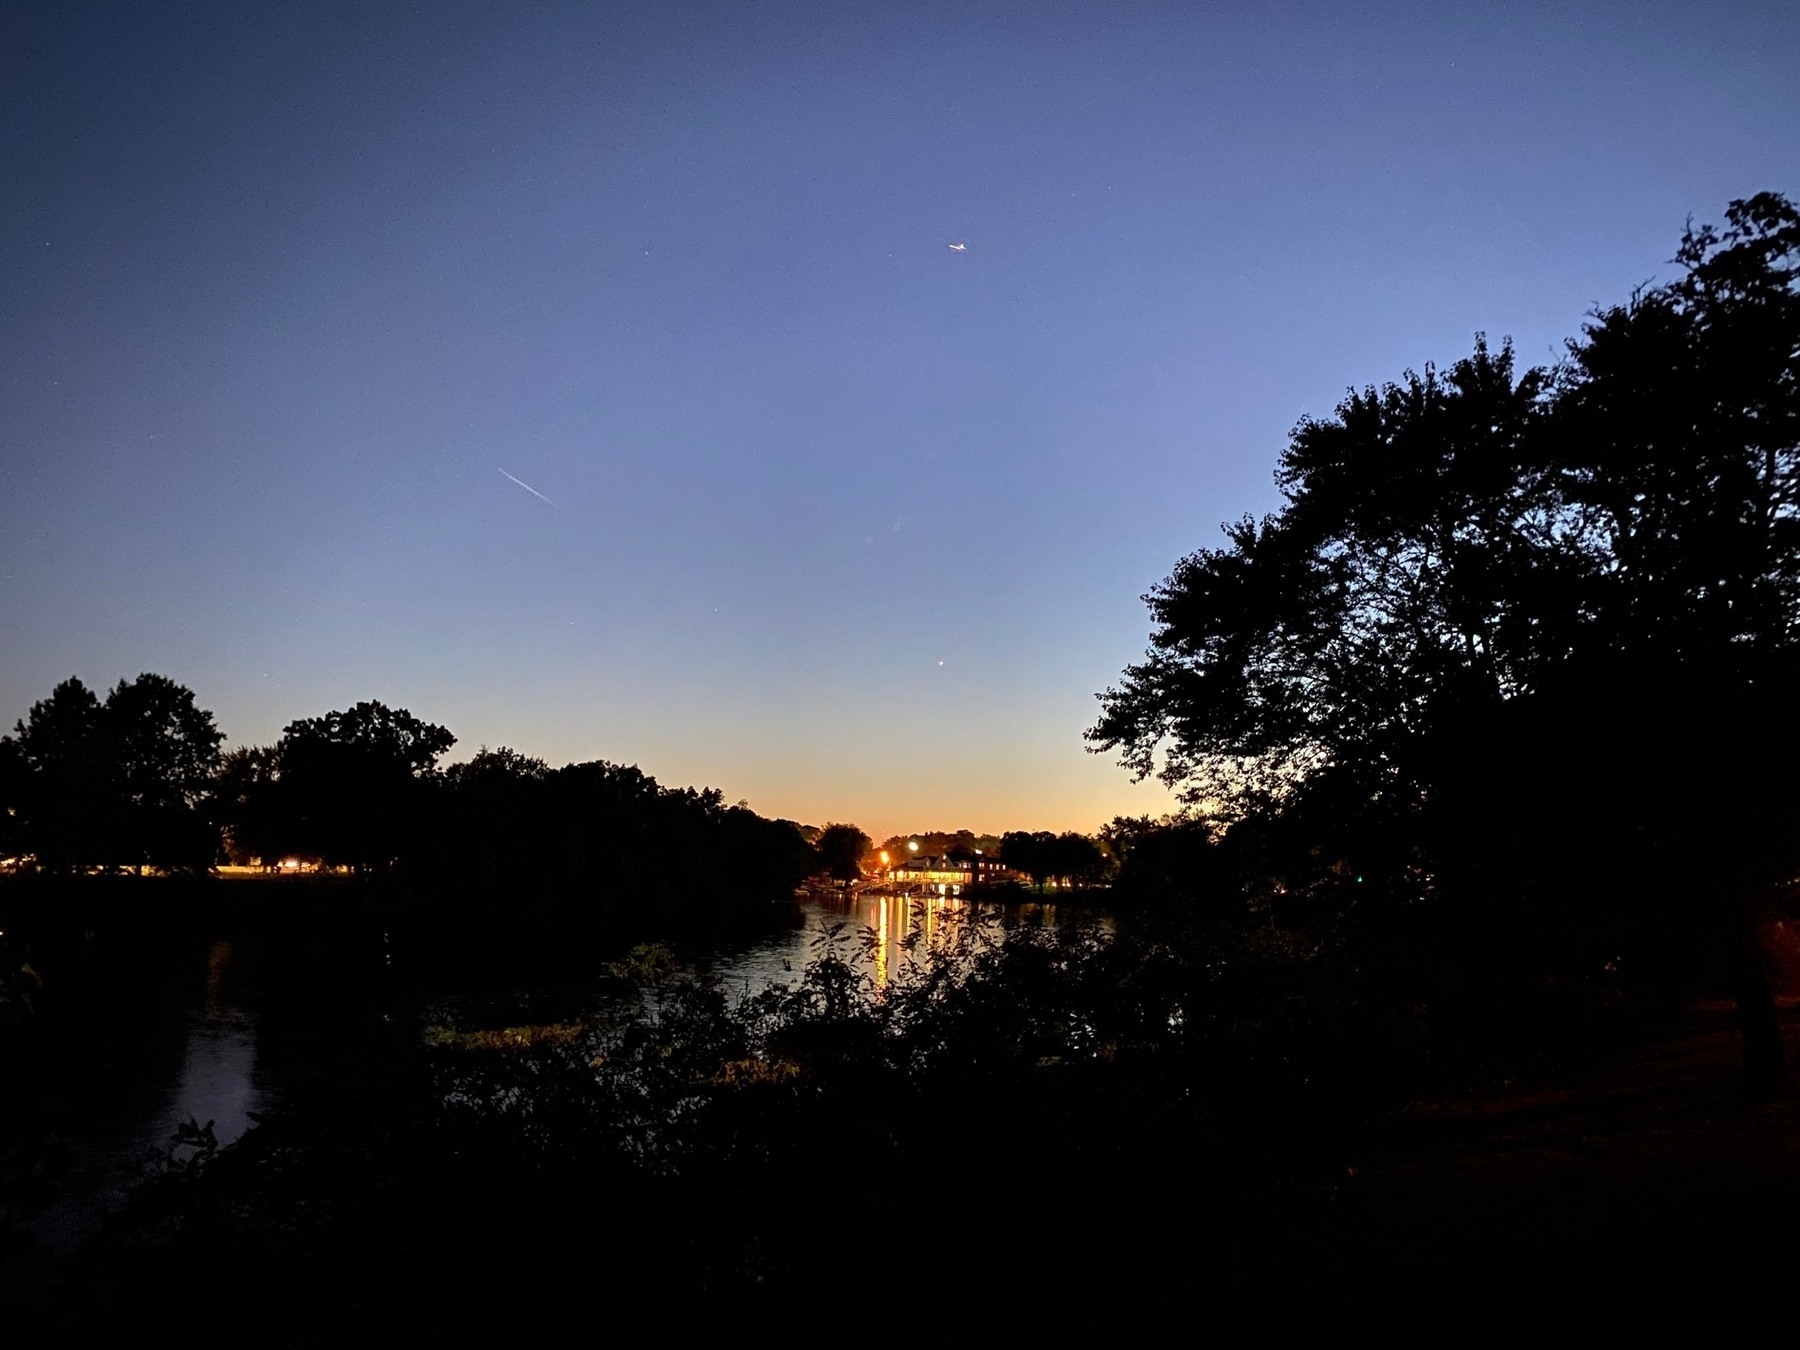 View of a river just after sunset, with a brightly lit boathouse on the far shore.